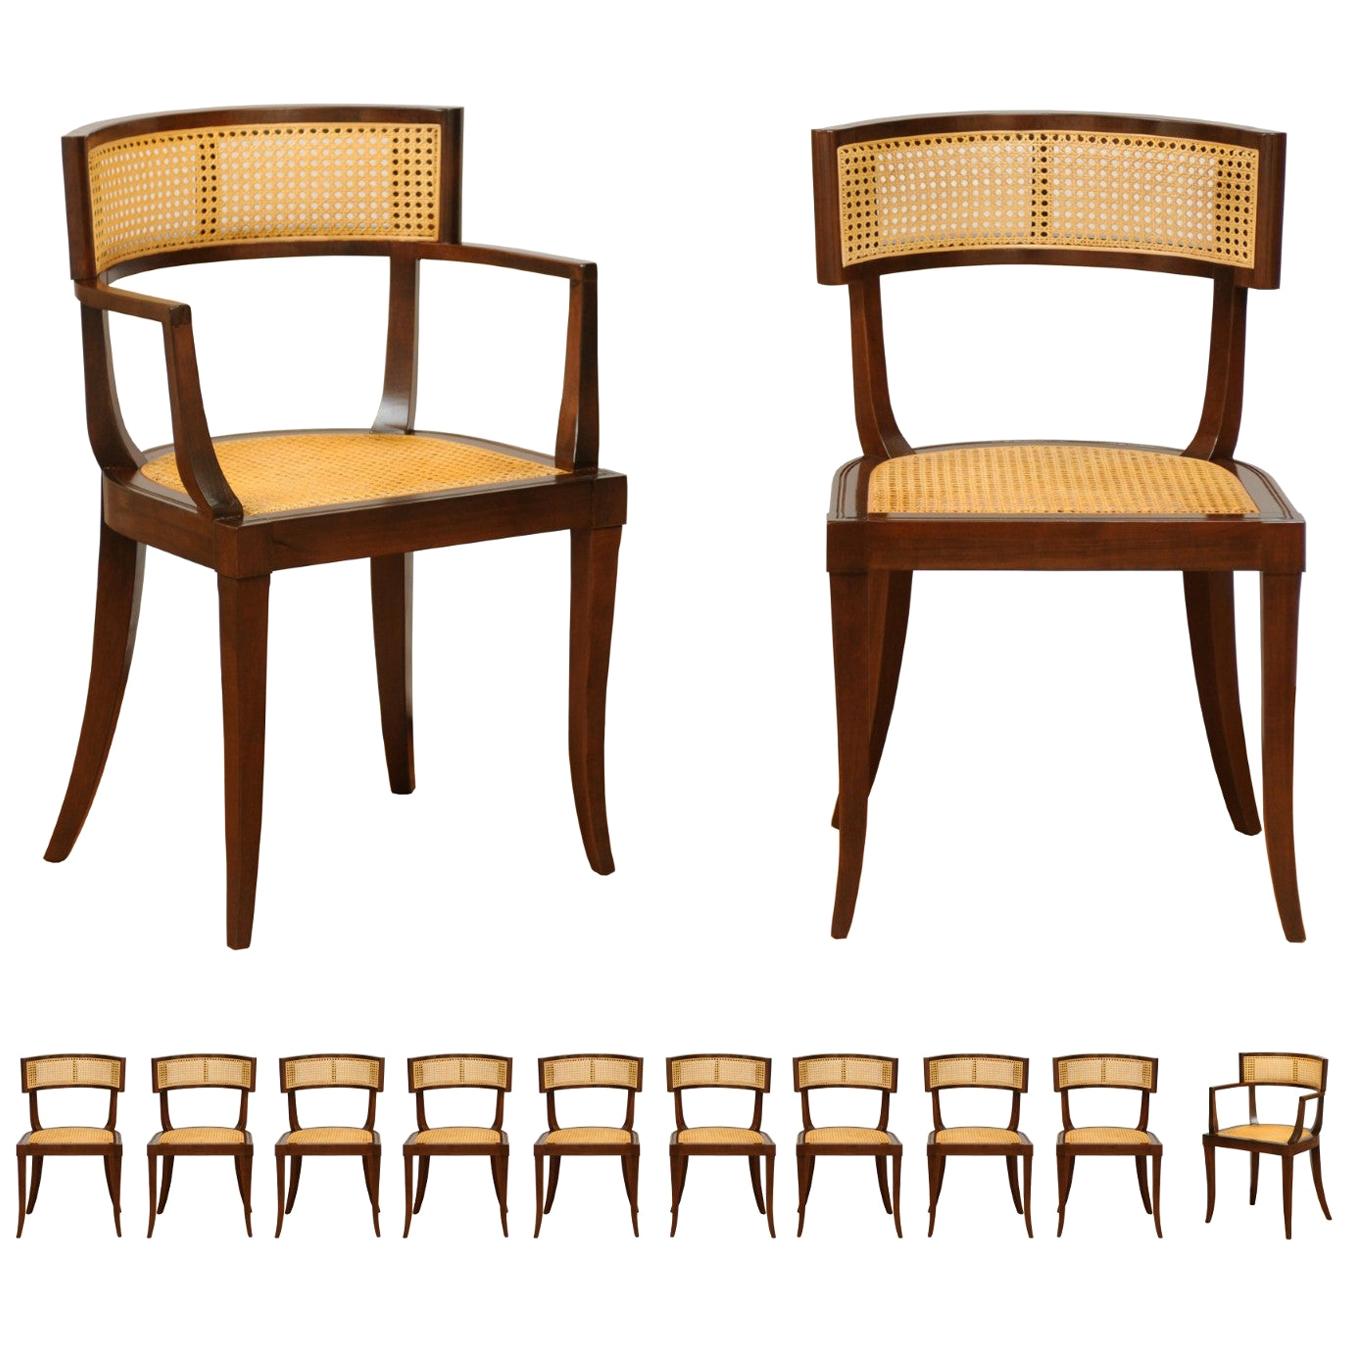 Exquisite Set of 12 Klismos Cane Dining Chairs by Baker, circa 1958, Cane Seats